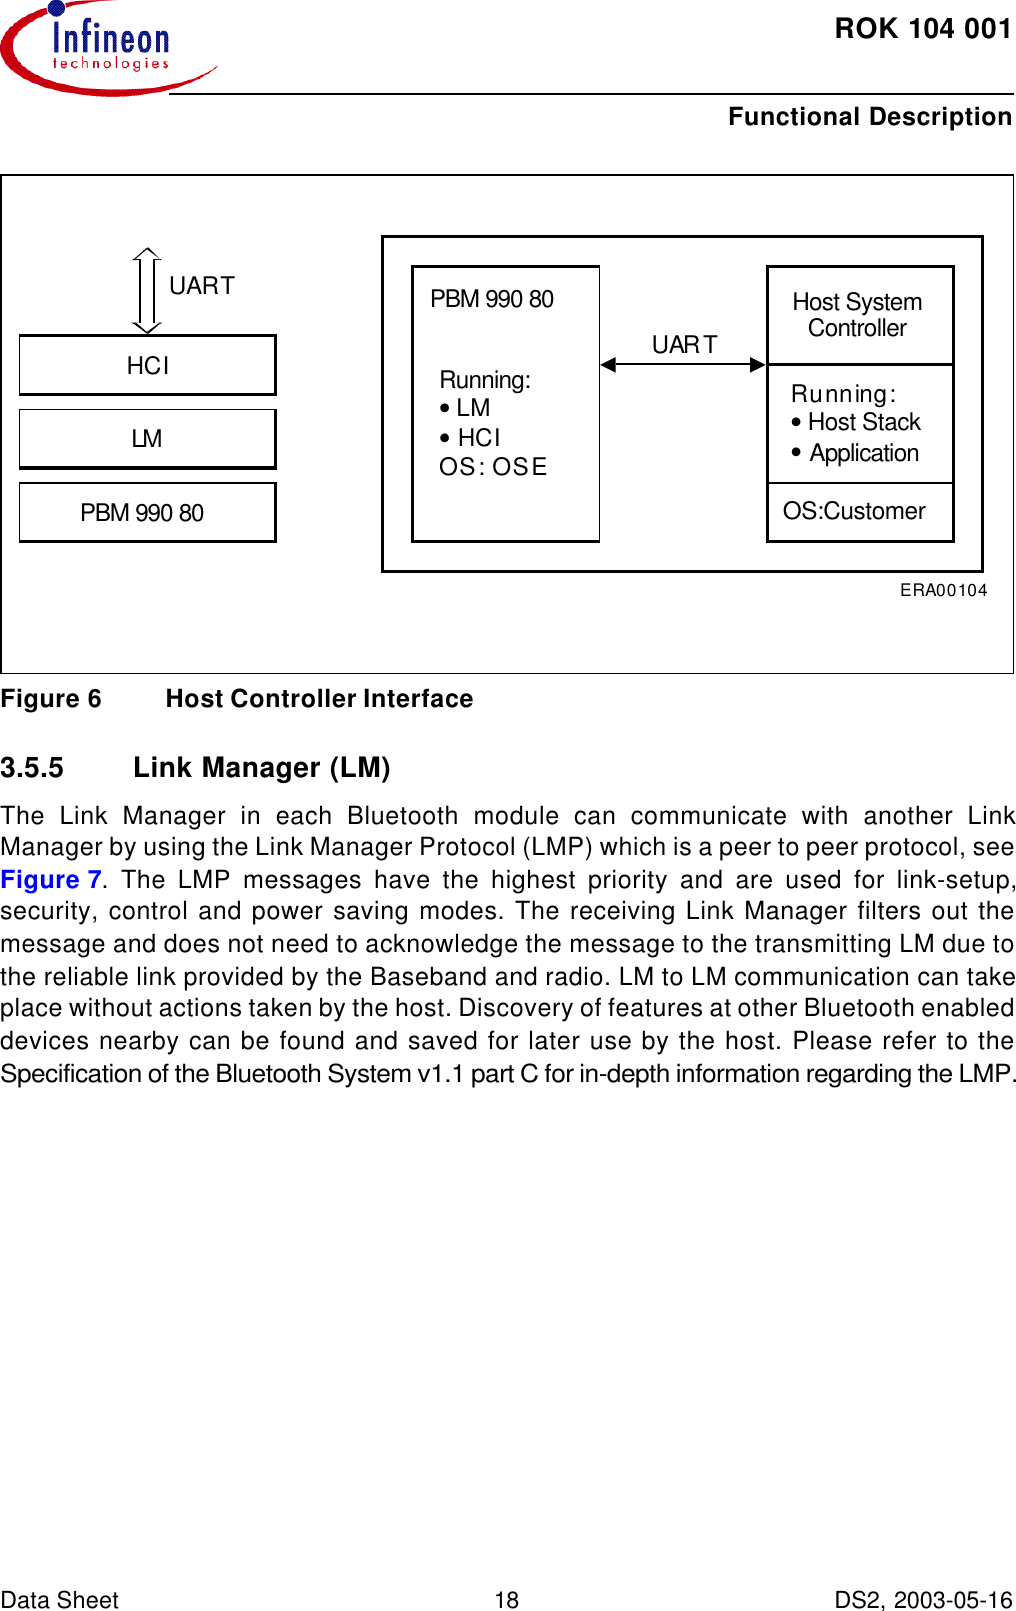 ROK104001Functional DescriptionData Sheet 18 DS2, 2003-05-16   Figure6 Host Controller Interface3.5.5 Link Manager (LM)The Link Manager in each Bluetooth module can communicate with another LinkManager by using the Link Manager Protocol (LMP) which is a peer to peer protocol, seeFigure7. The LMP messages have the highest priority and are used for link-setup,security, control and power saving modes. The receiving Link Manager filters out themessage and does not need to acknowledge the message to the transmitting LM due tothe reliable link provided by the Baseband and radio. LM to LM communication can takeplace without actions taken by the host. Discovery of features at other Bluetooth enableddevices nearby can be found and saved for later use by the host. Please refer to theSpecification of the Bluetooth System v1.1 part C for in-depth information regarding the LMP.ERA00104PBM 990 80LMHCIUARTPBM 990 80Running:•LM•HCIOS:OSEUARTRunning:•Host Stack•ApplicationOS:CustomerHost SystemController